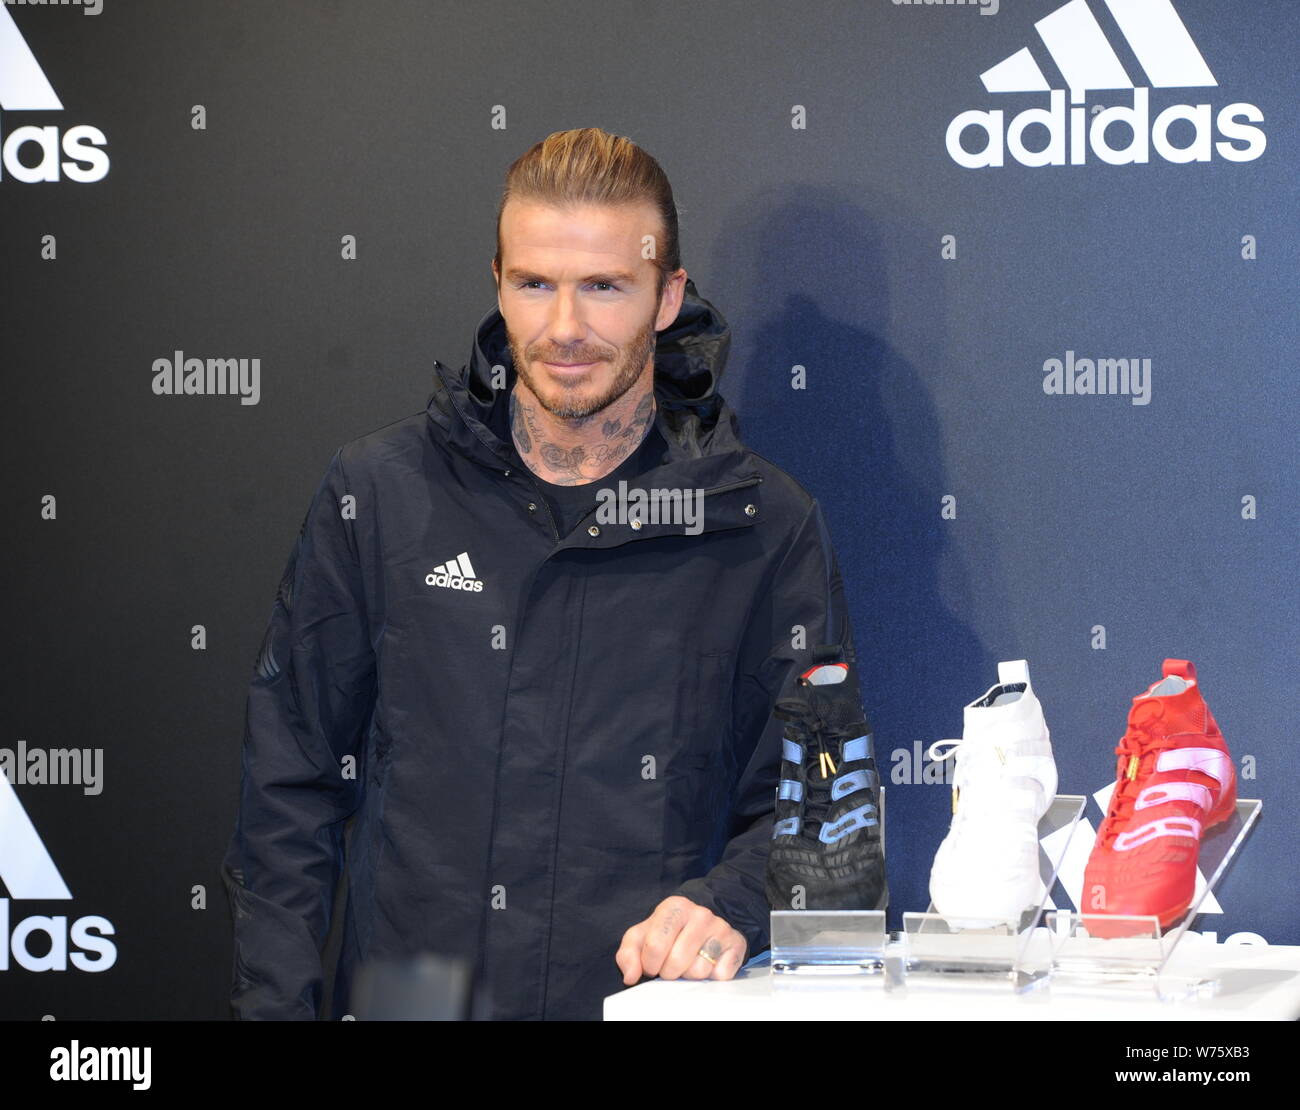 English soccer star David Beckham attends a promotional event for Adidas in  Shanghai, China, 3 December 2017 Stock Photo - Alamy